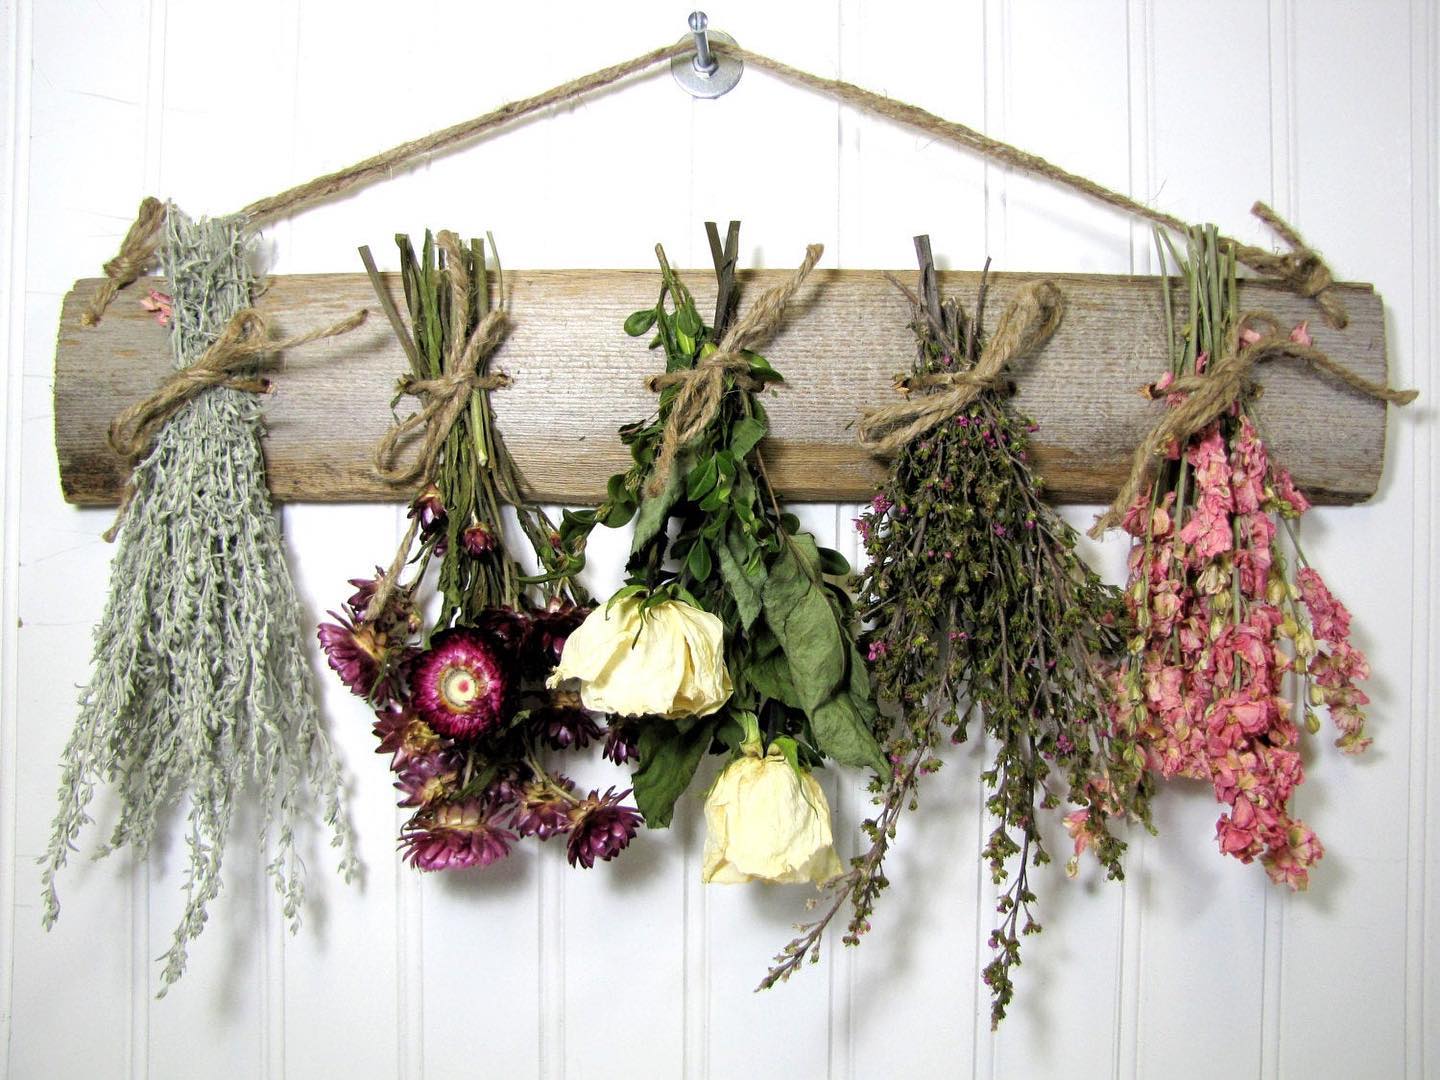 Dried Flowers Back In Stock!